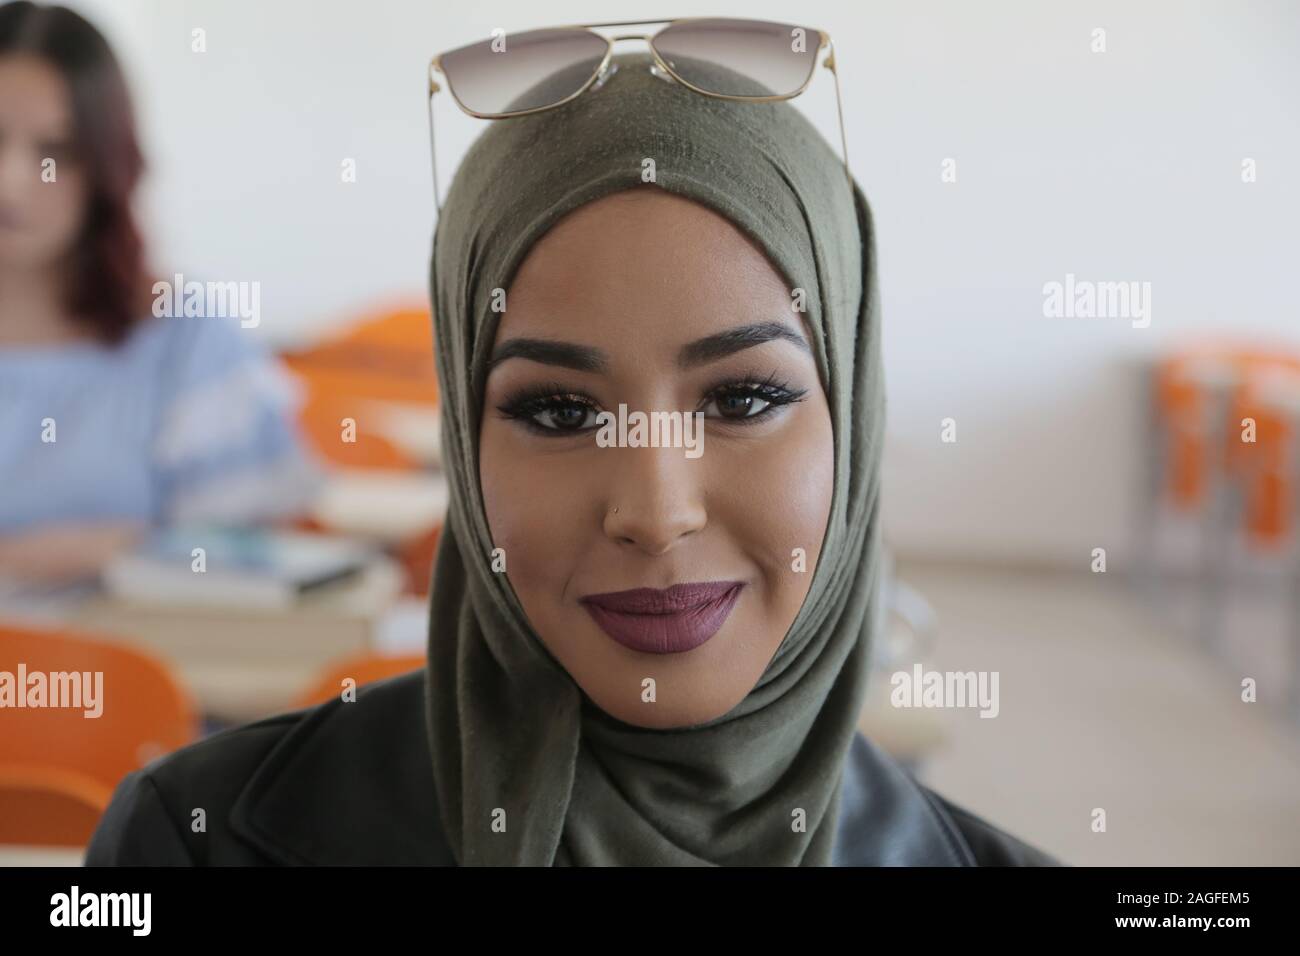 Portrait of muslim student girl mixed race wearing hijab at classroom desk. Stock Photo